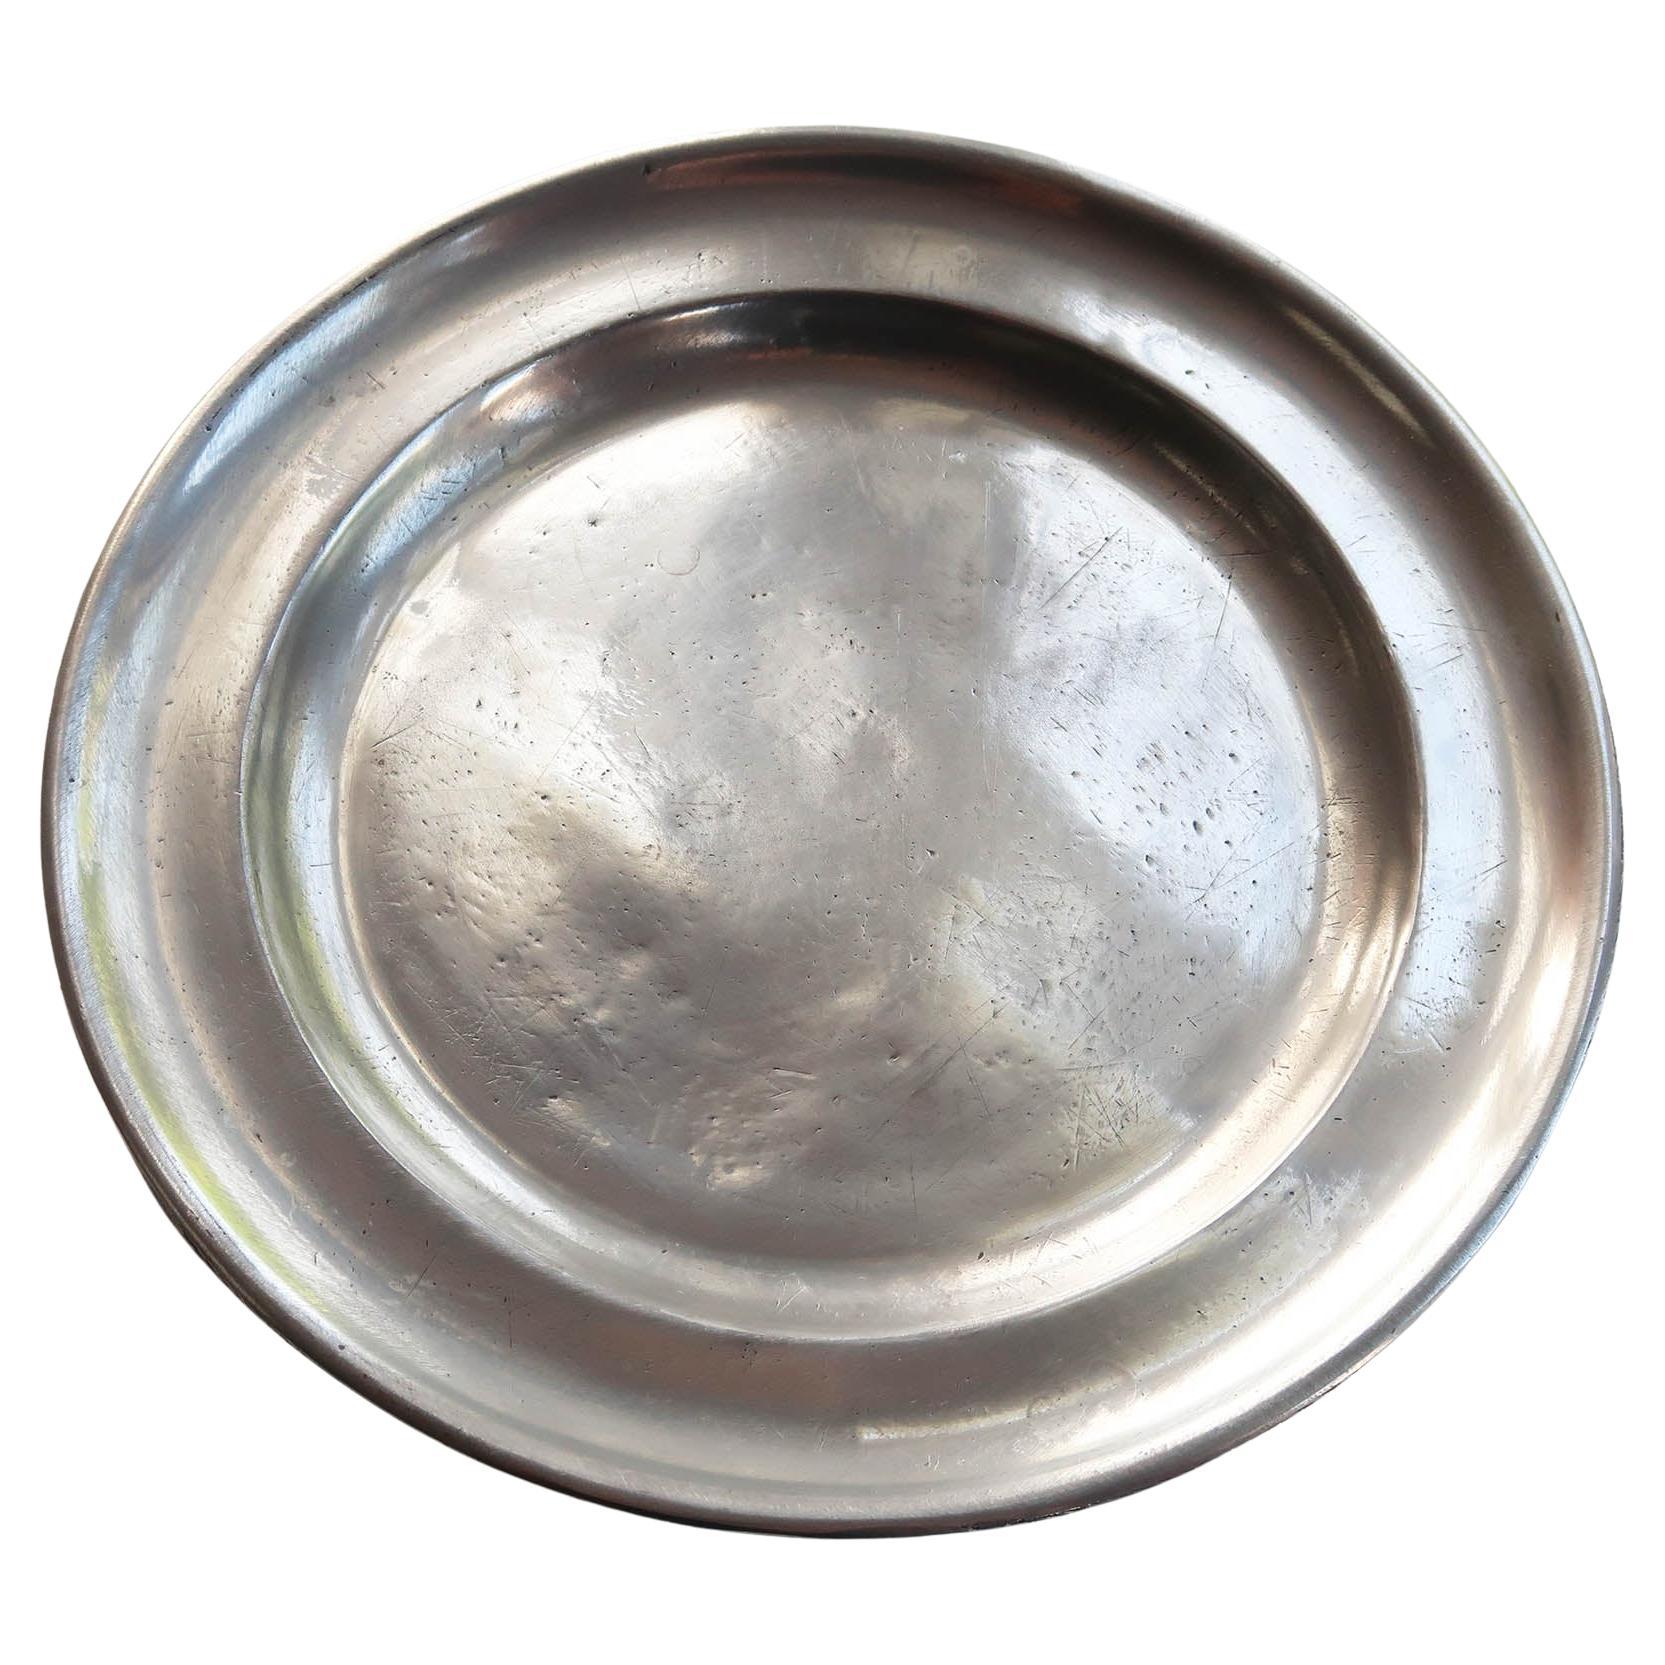 Antique Brightly Polished Pewter Plate, English, C.1800